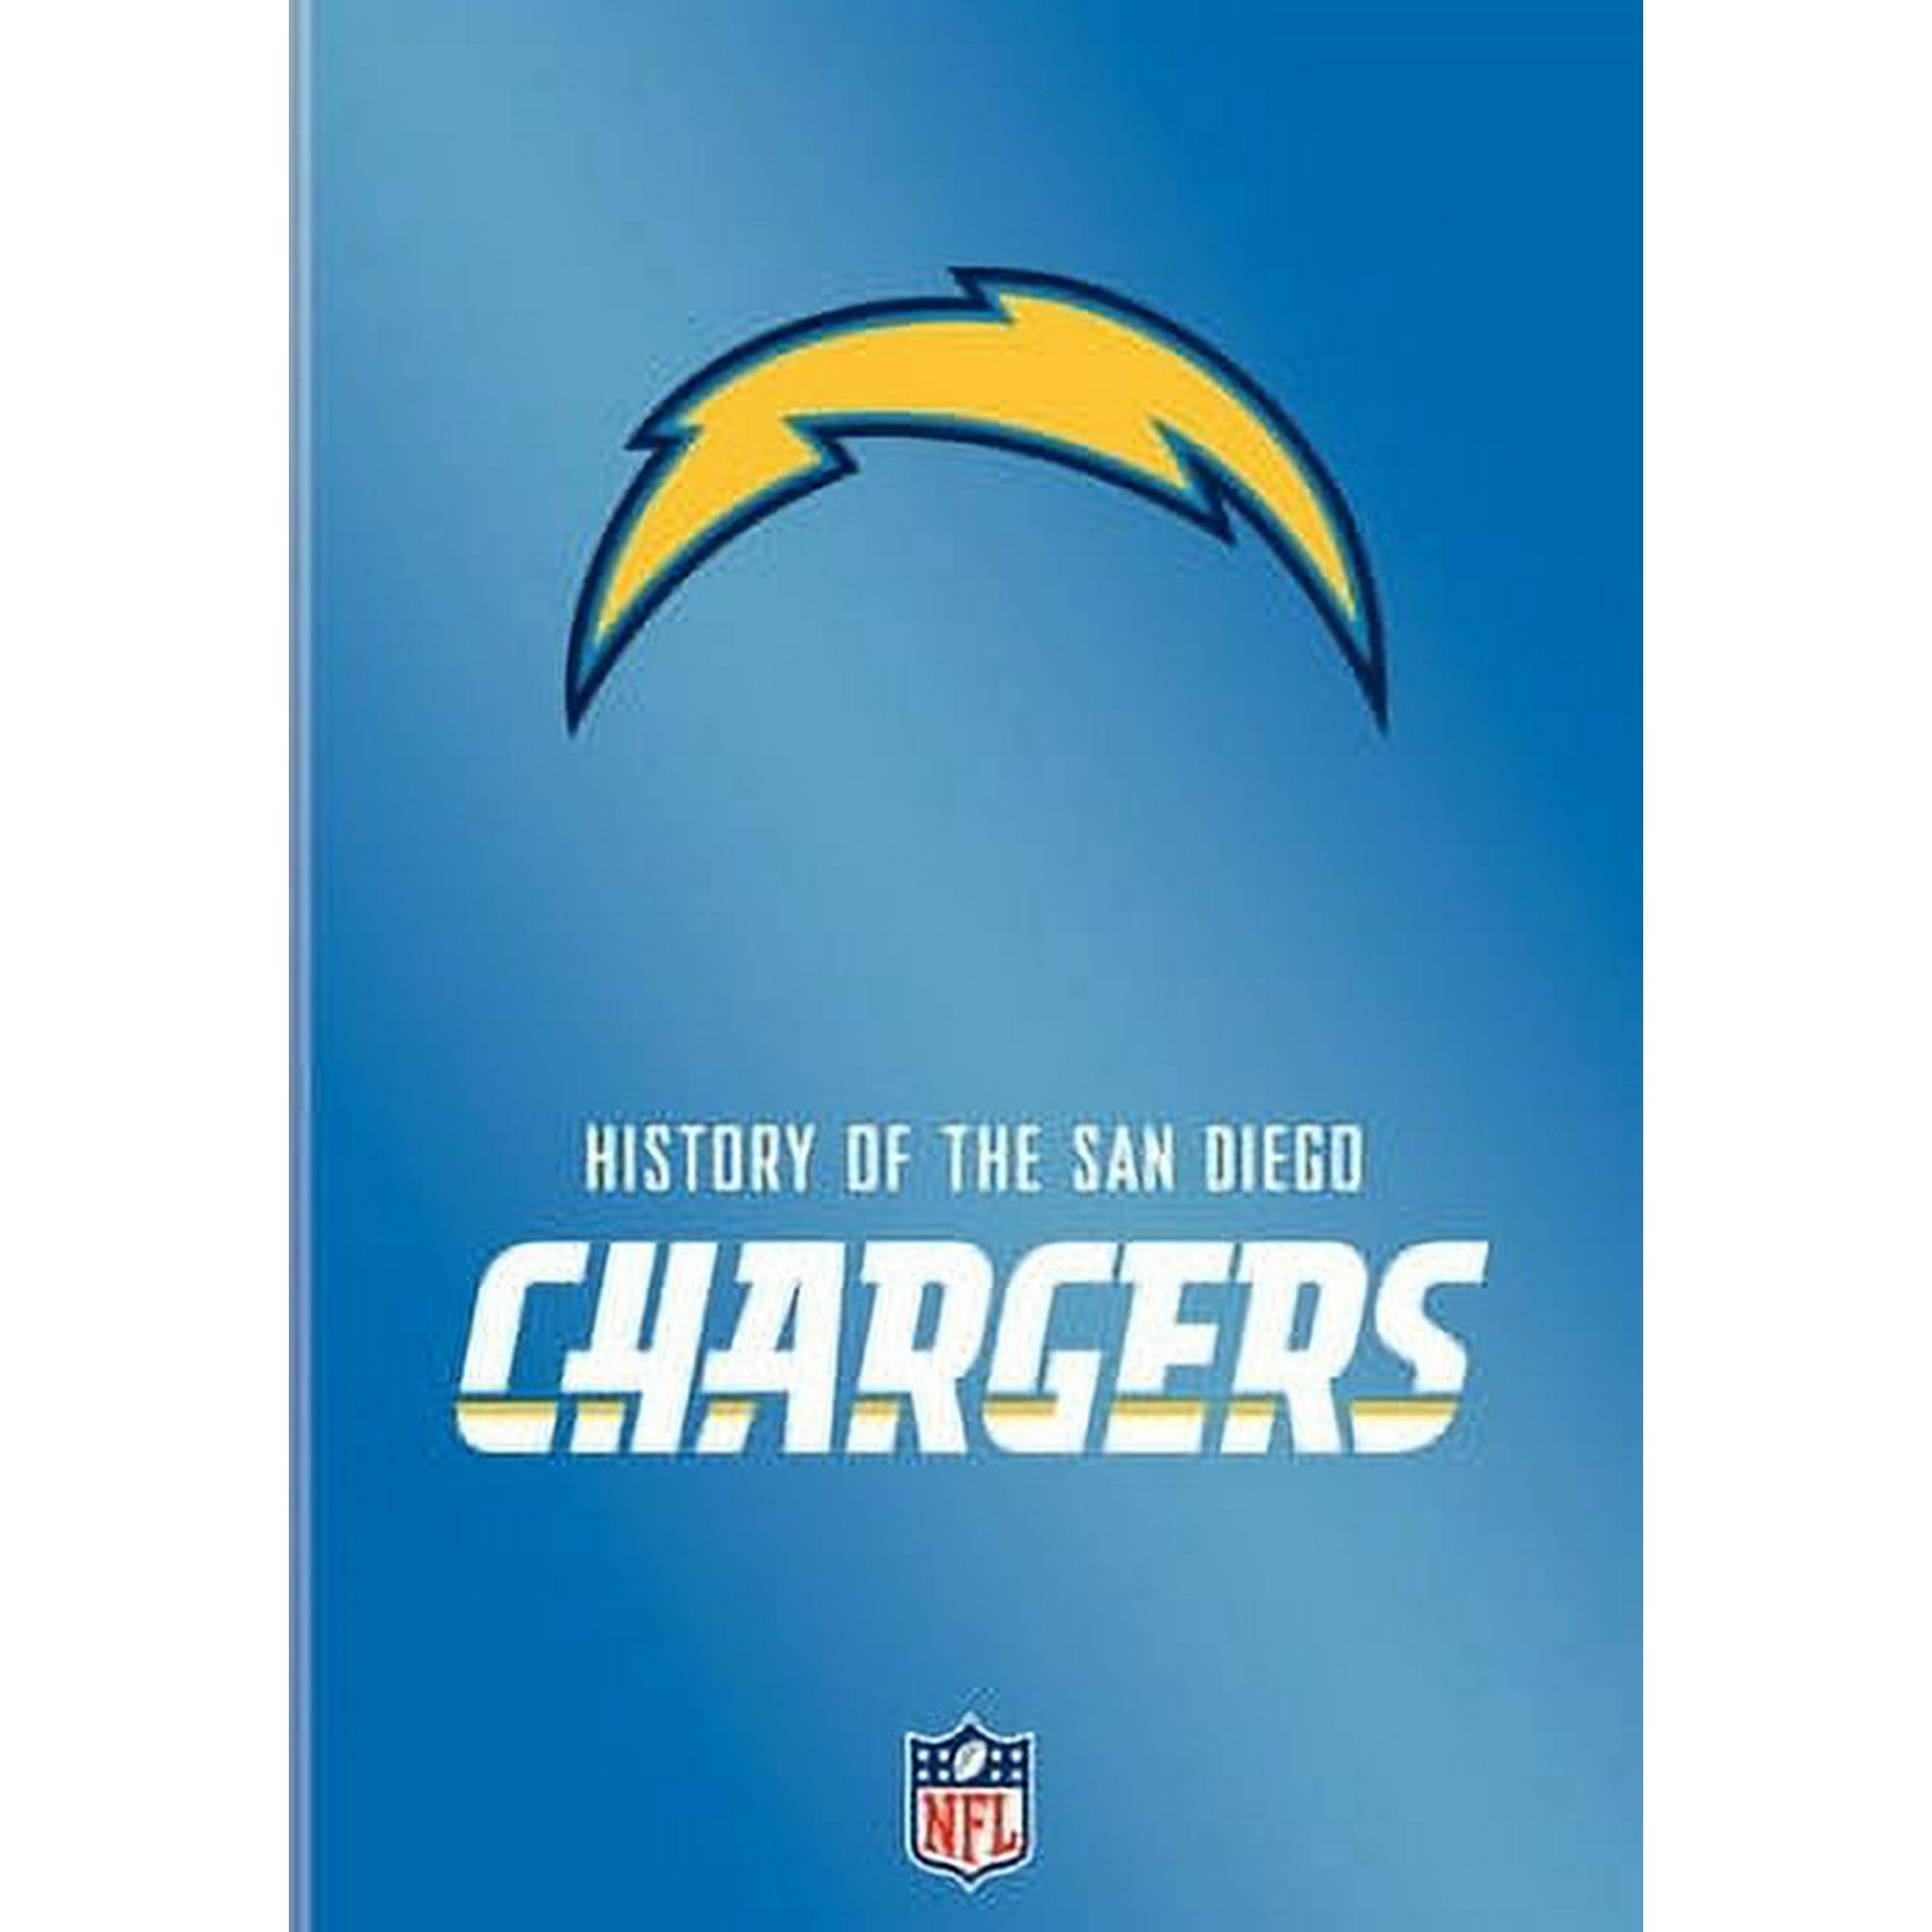 NFL History of the San Diego Chargers (DVD) 